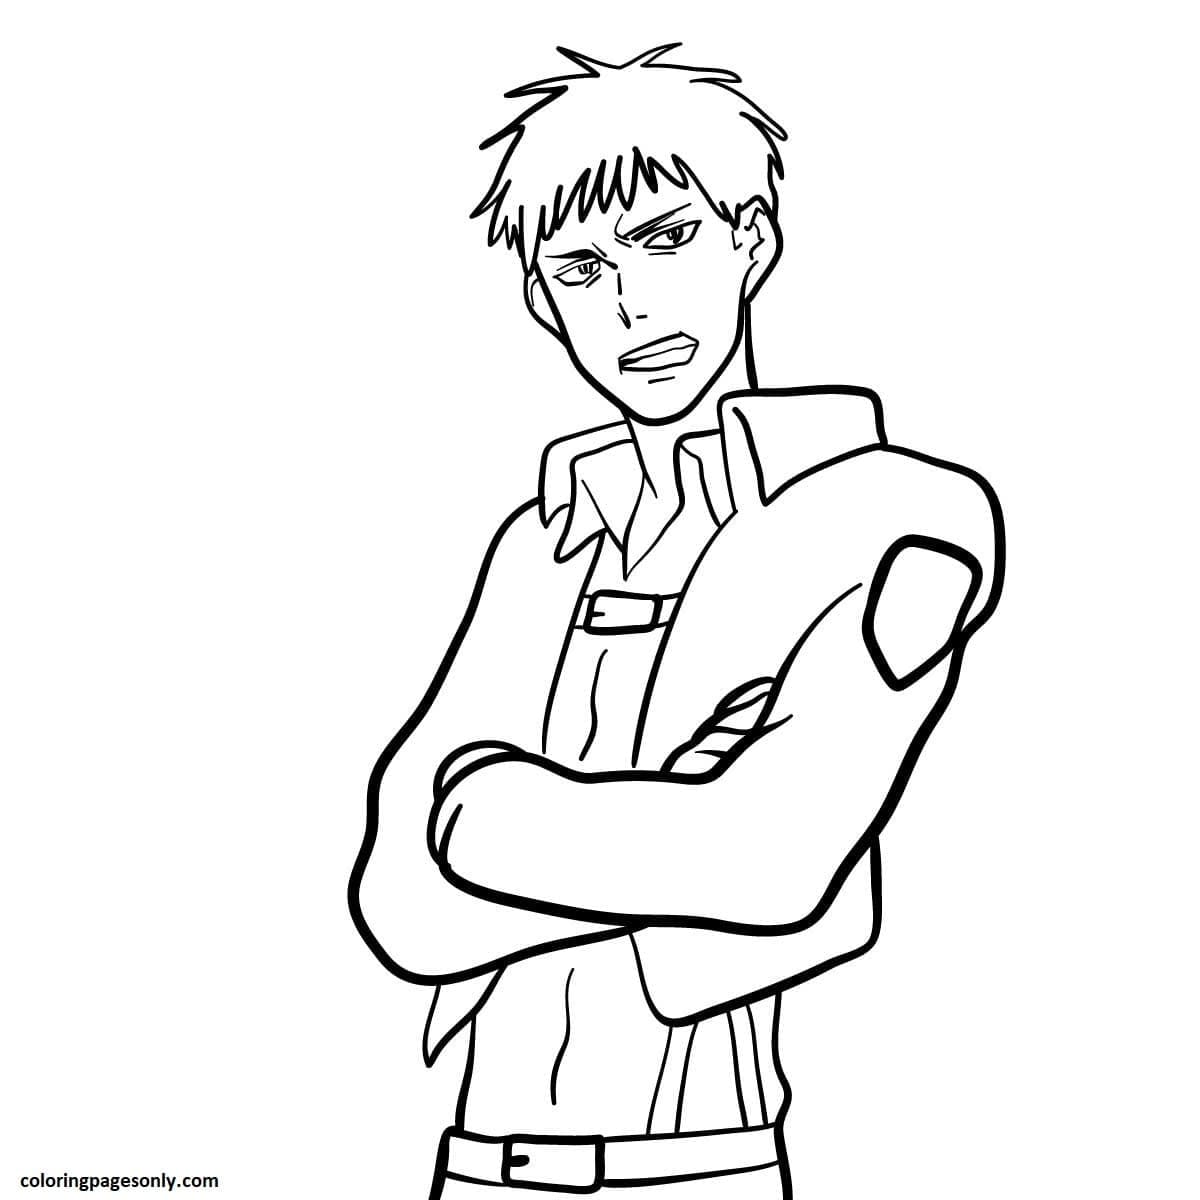 AOT 27 Coloring Page